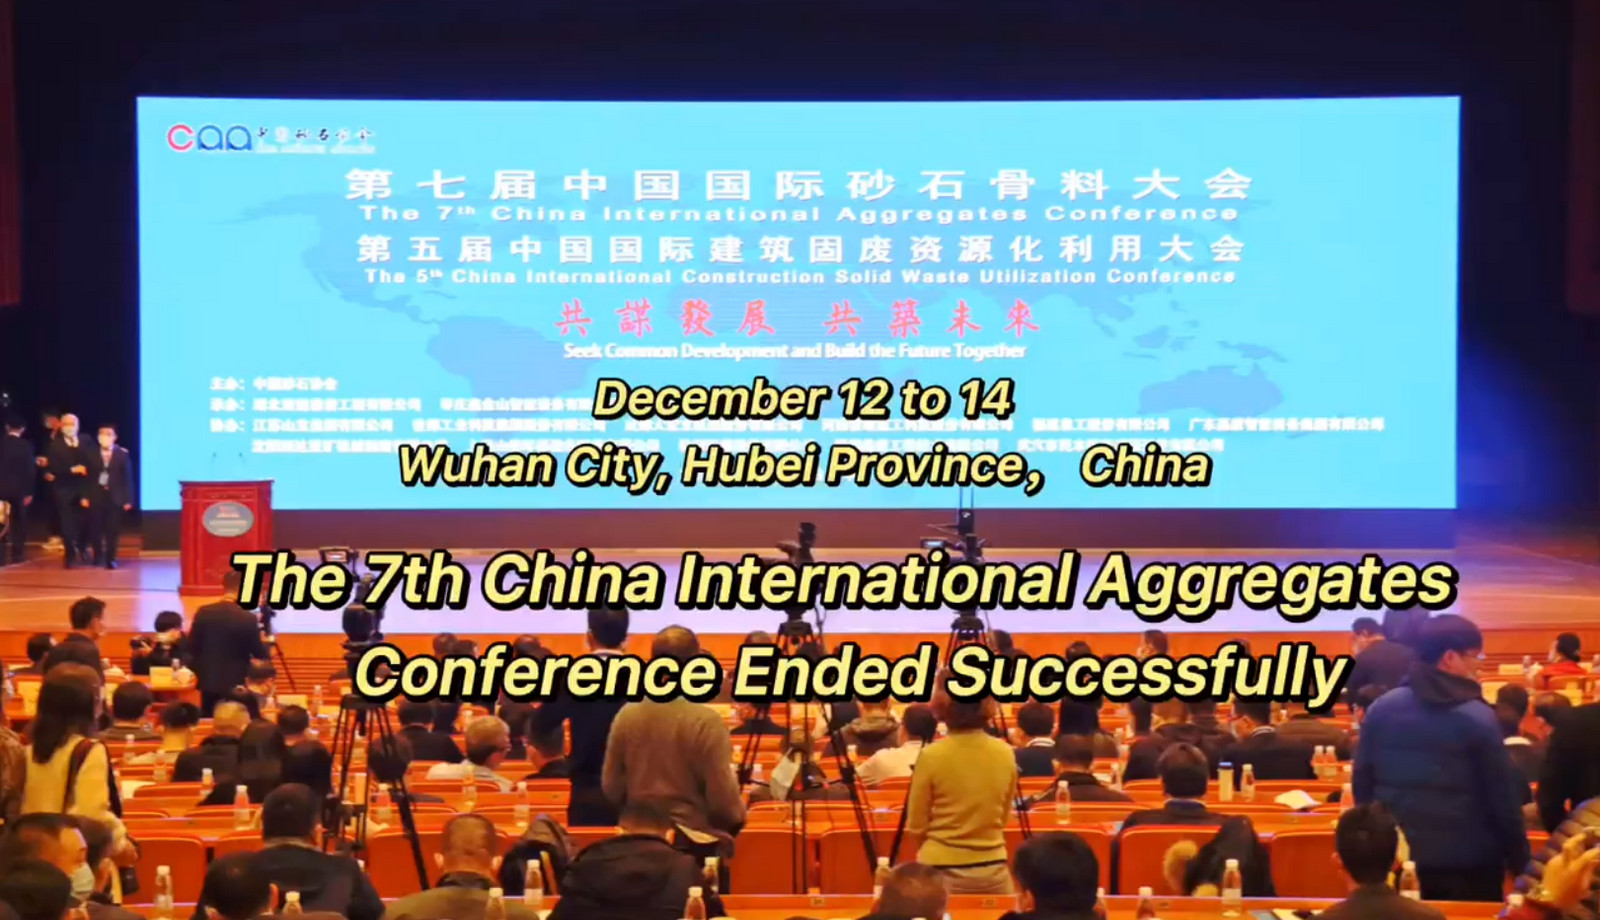 The 7th China International Aggregates Conference Ended Successfully